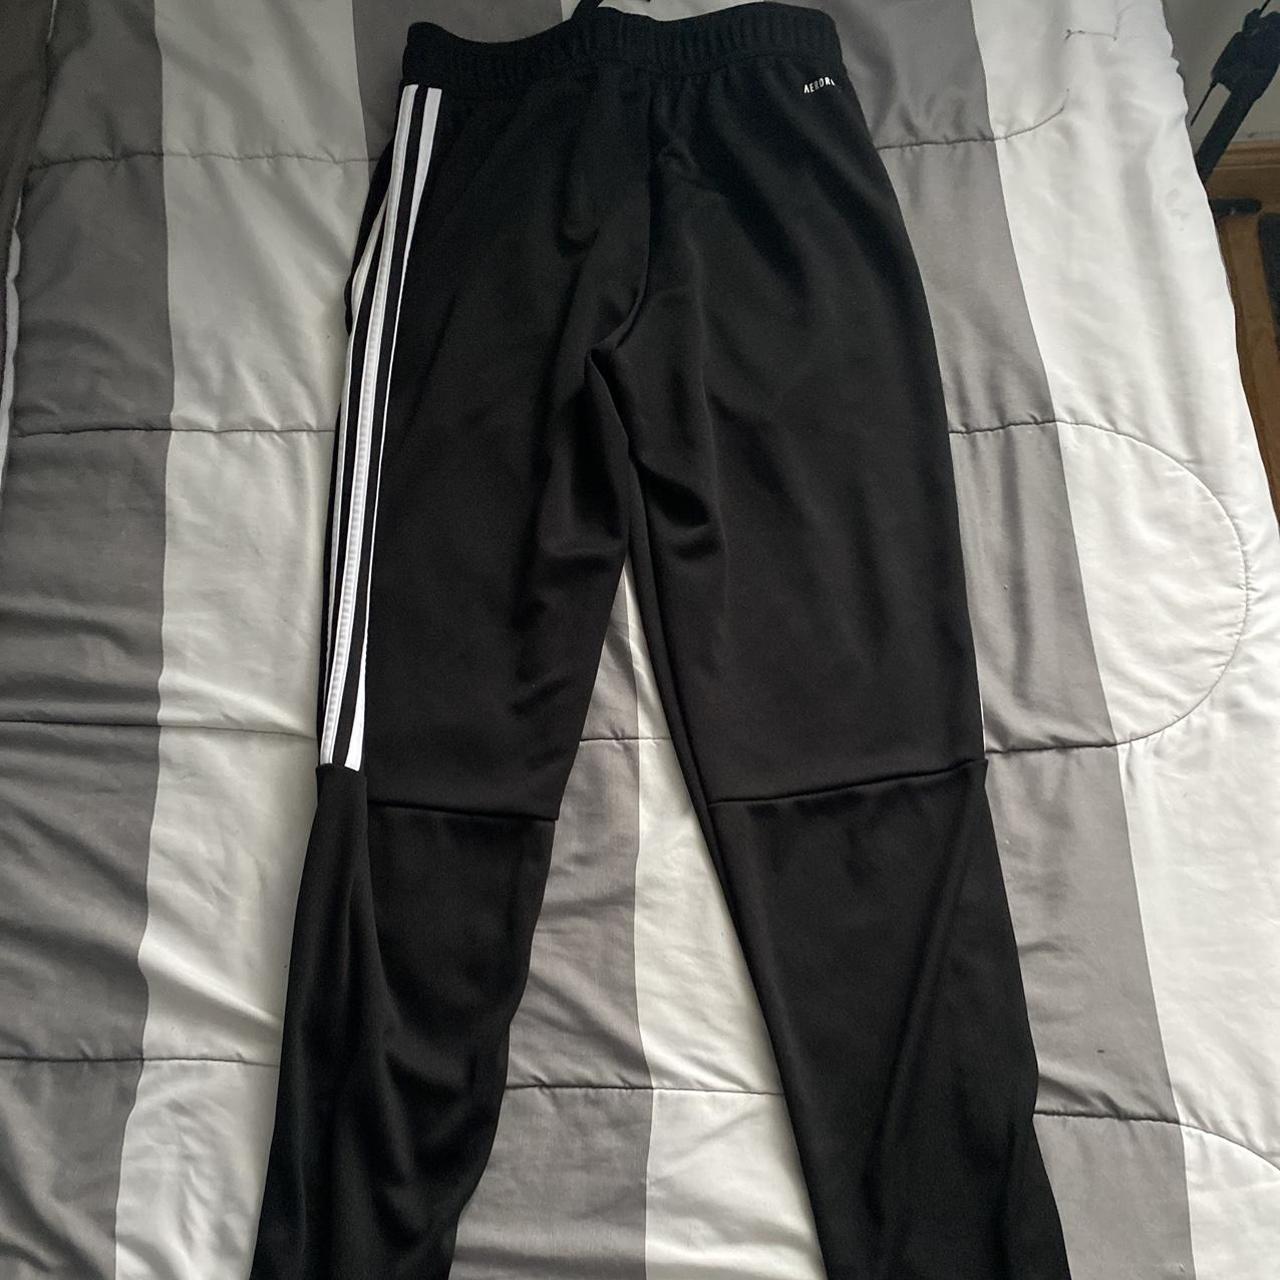 Adidas Men's Black and White Joggers-tracksuits (3)